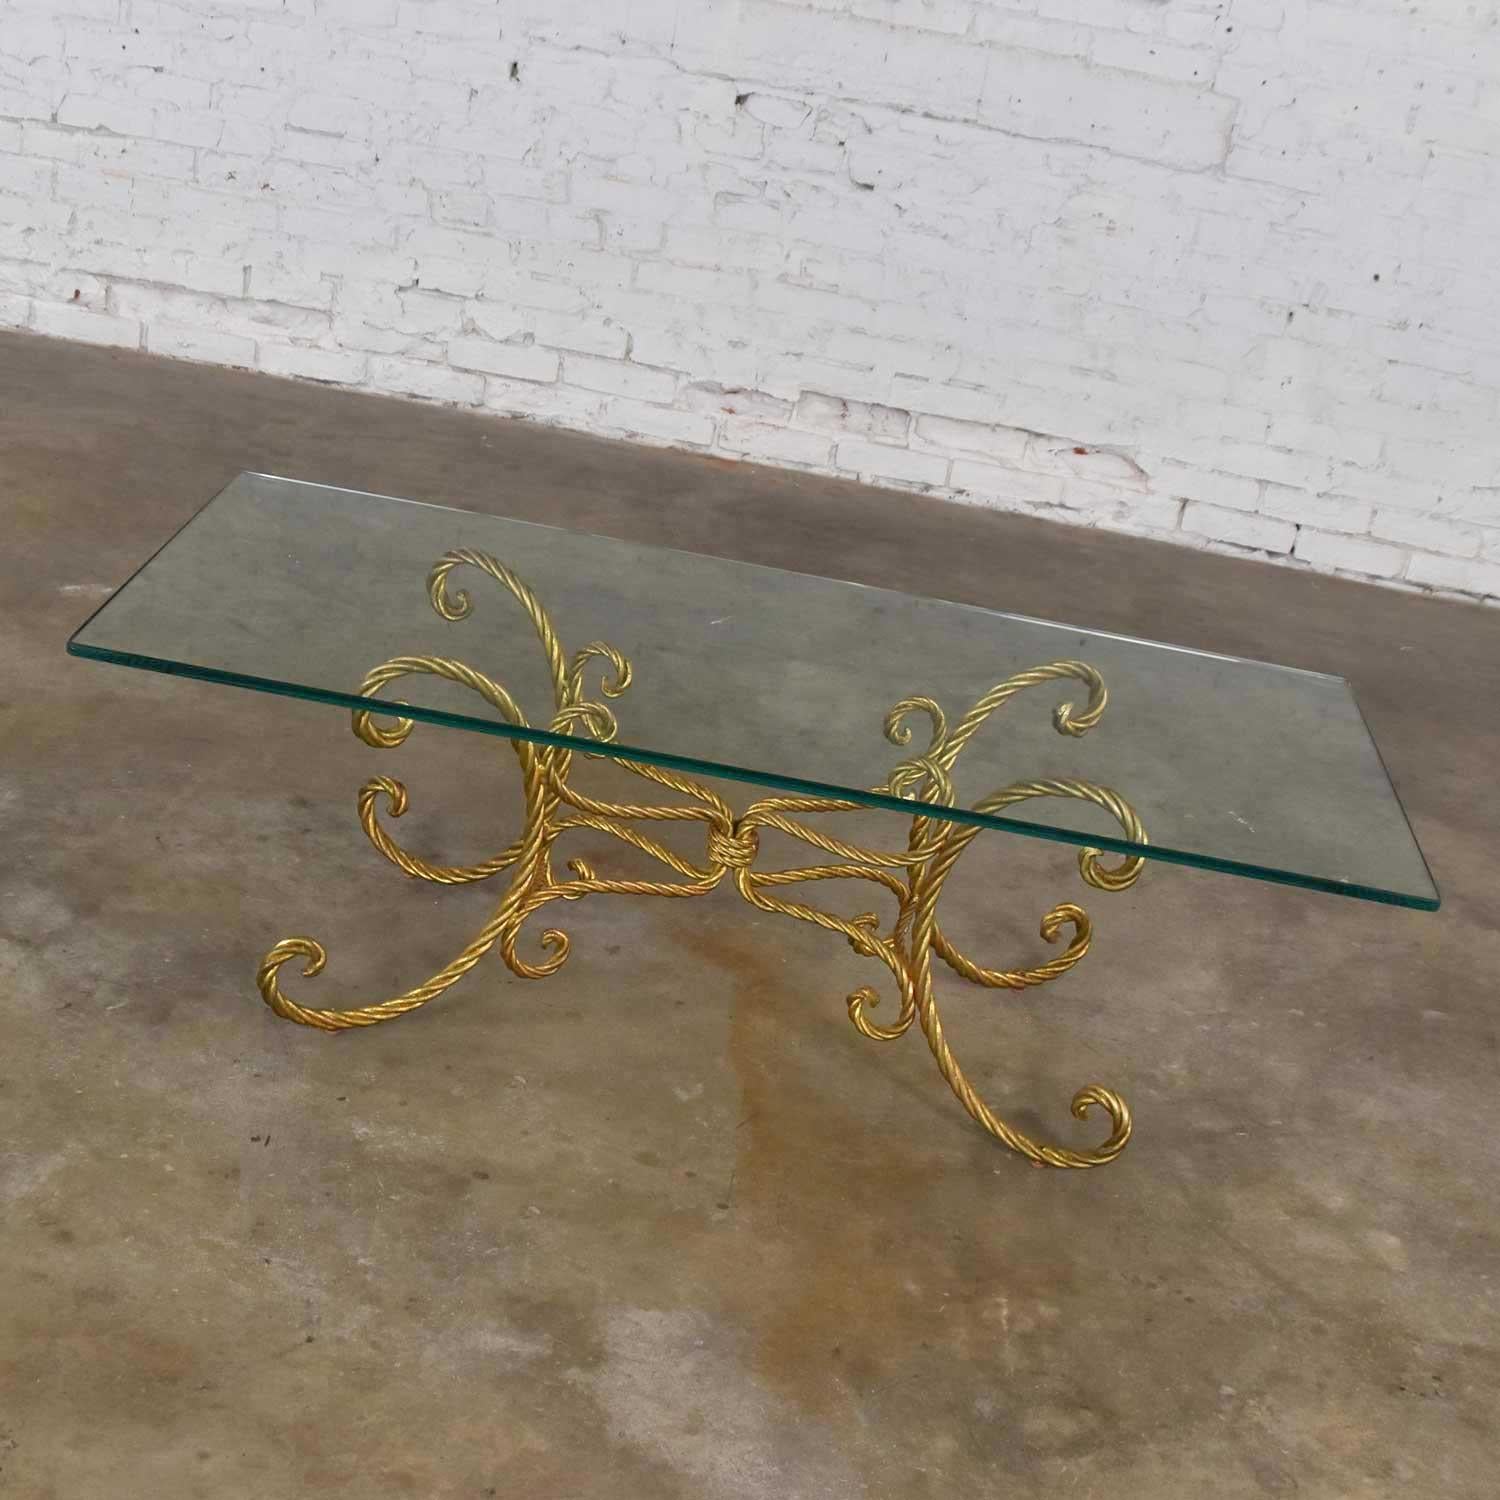 Hollywood Regency Vintage Italian Gilded Twisted Iron Rope Coffee or Cocktail Table Rectangle Top